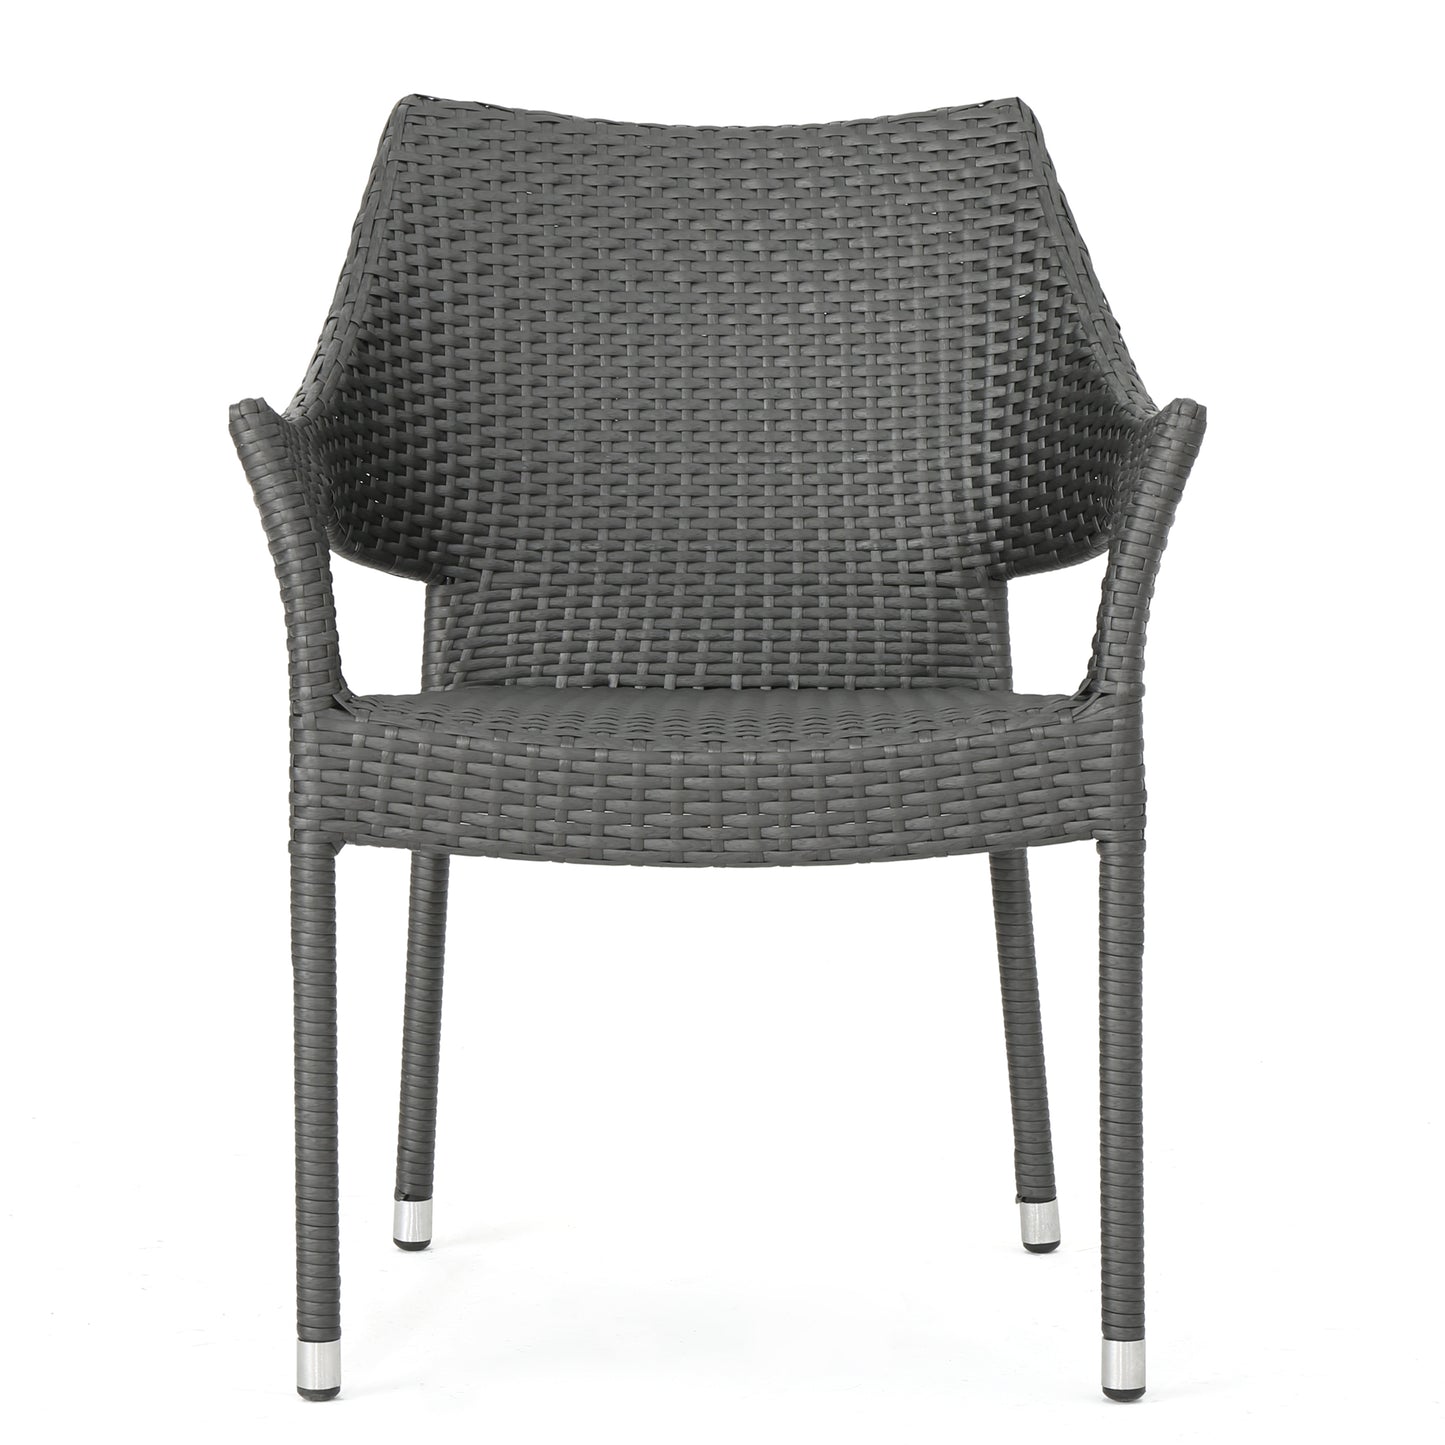 Melisandre Outdoor Grey Wicker Stacking Chairs (Set of 4)